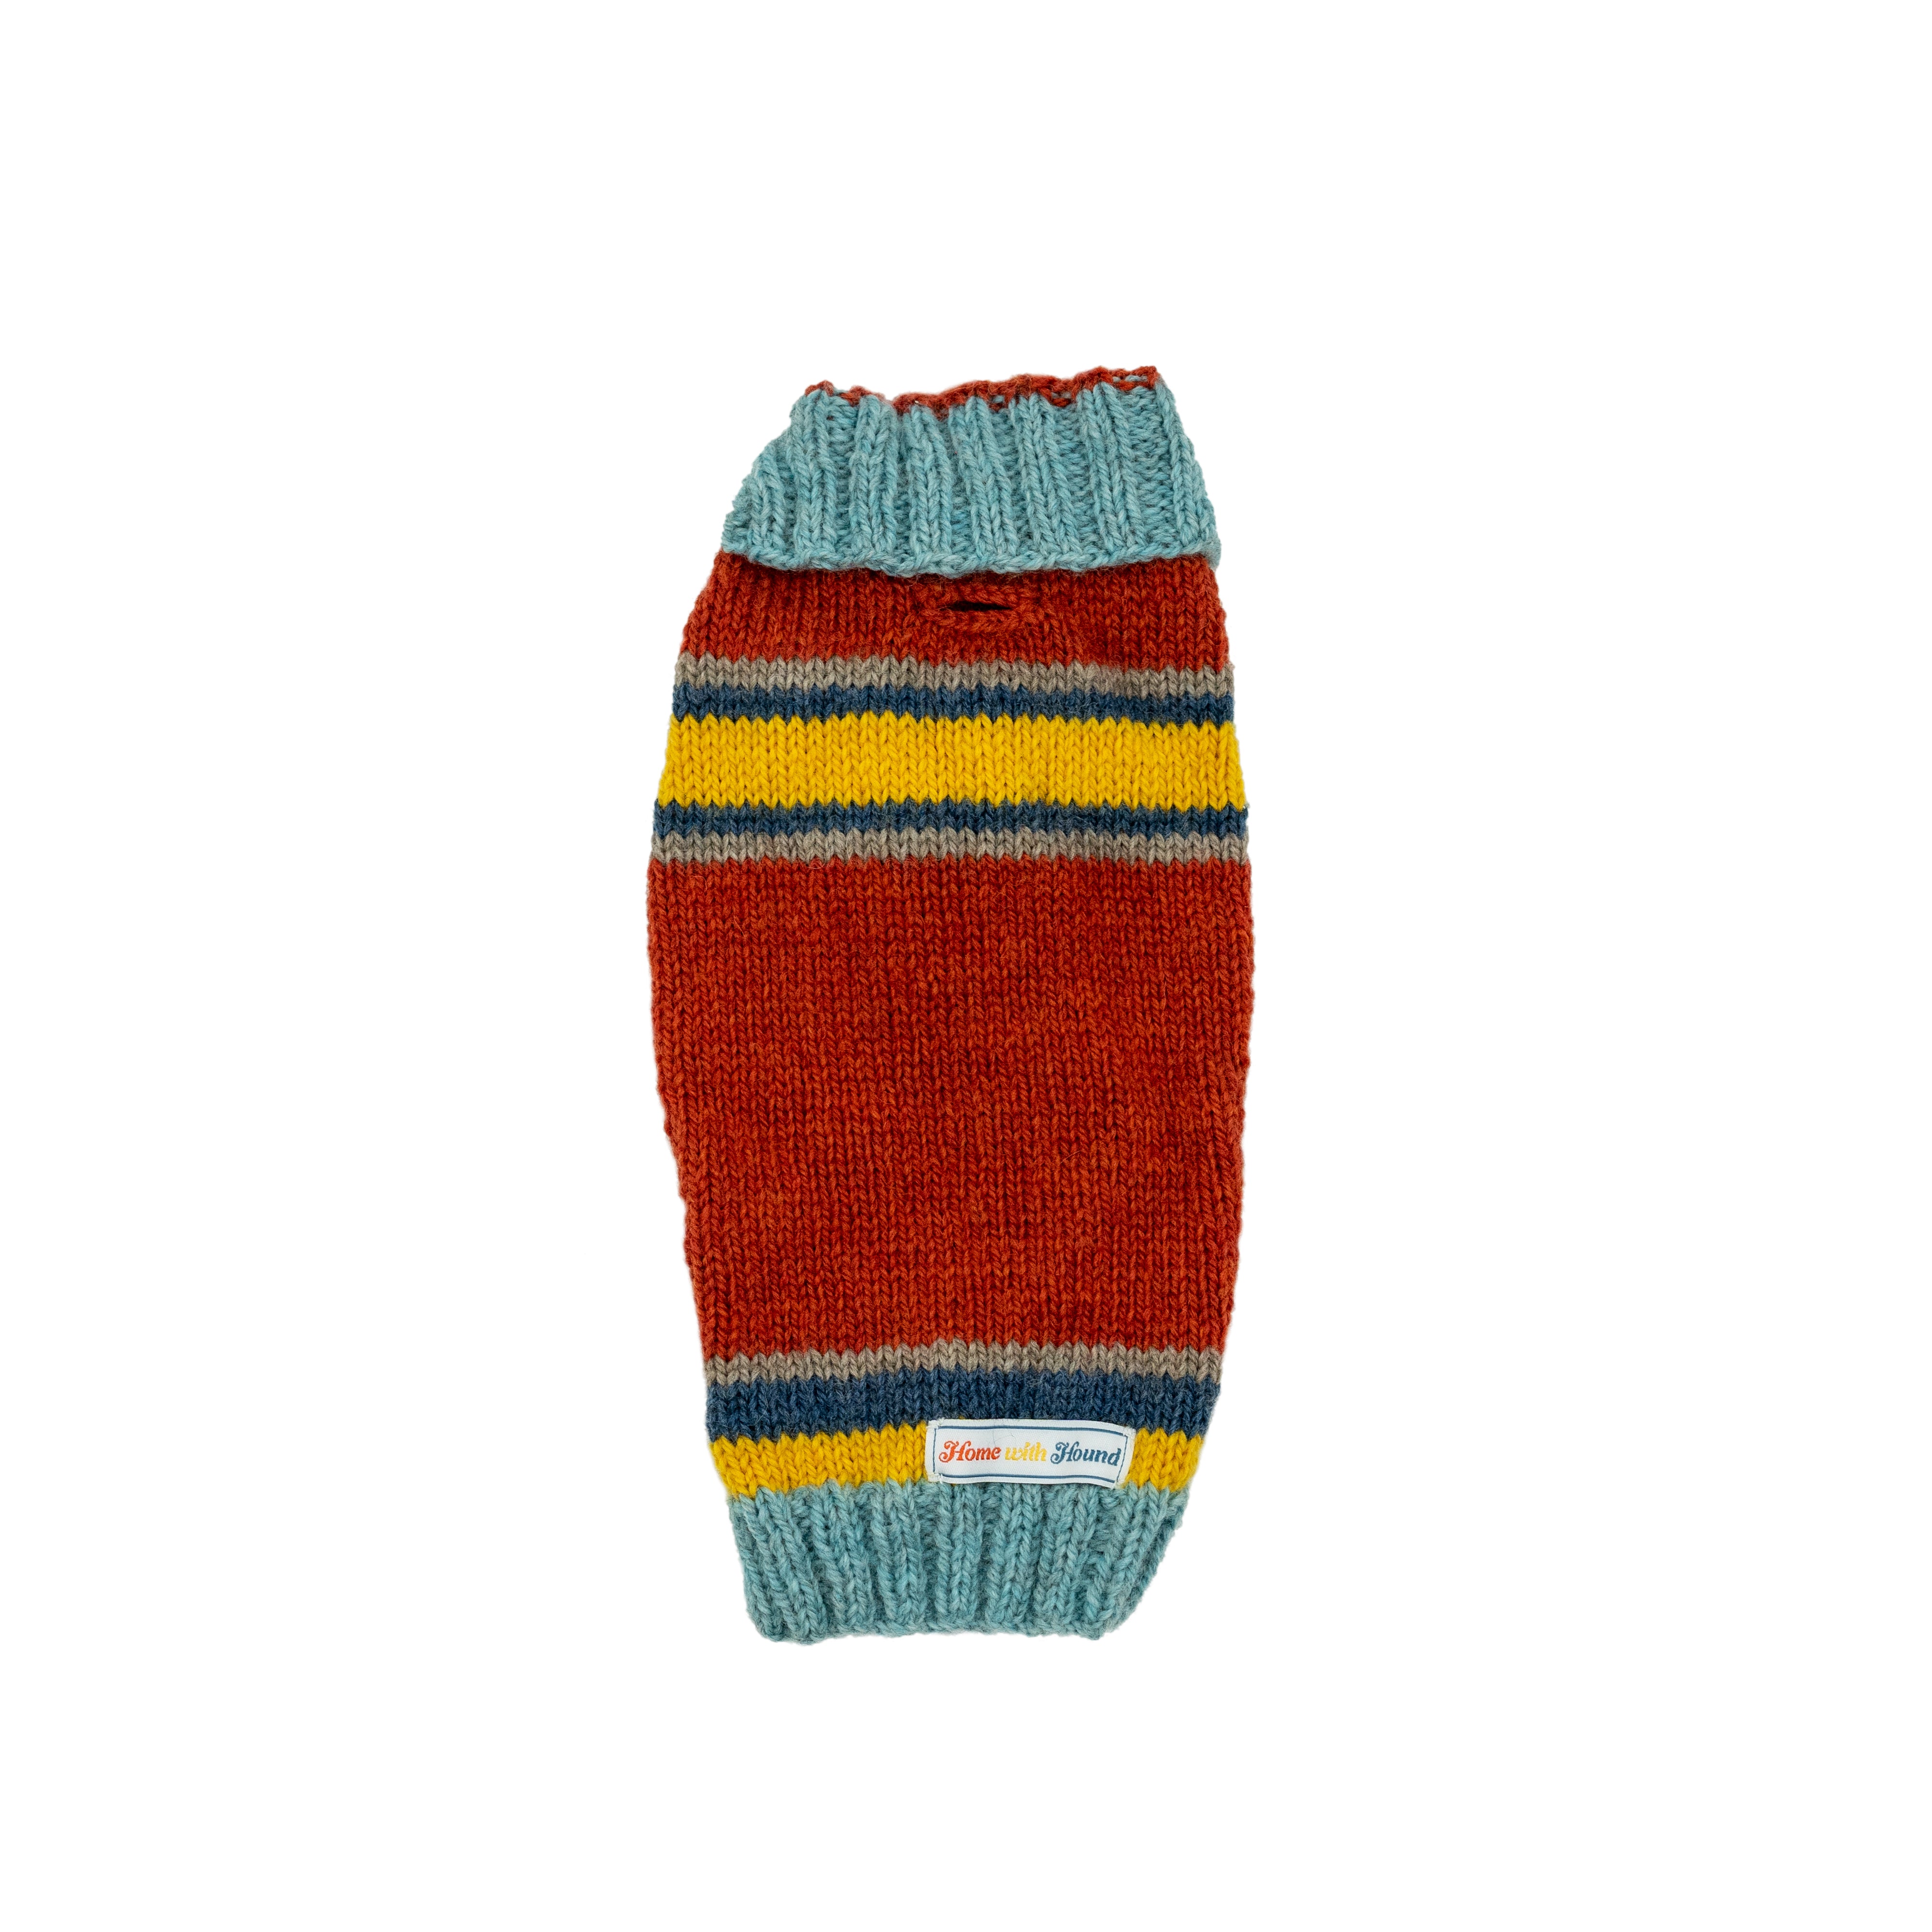 Rusted Roof Orange Striped Dog Sweater